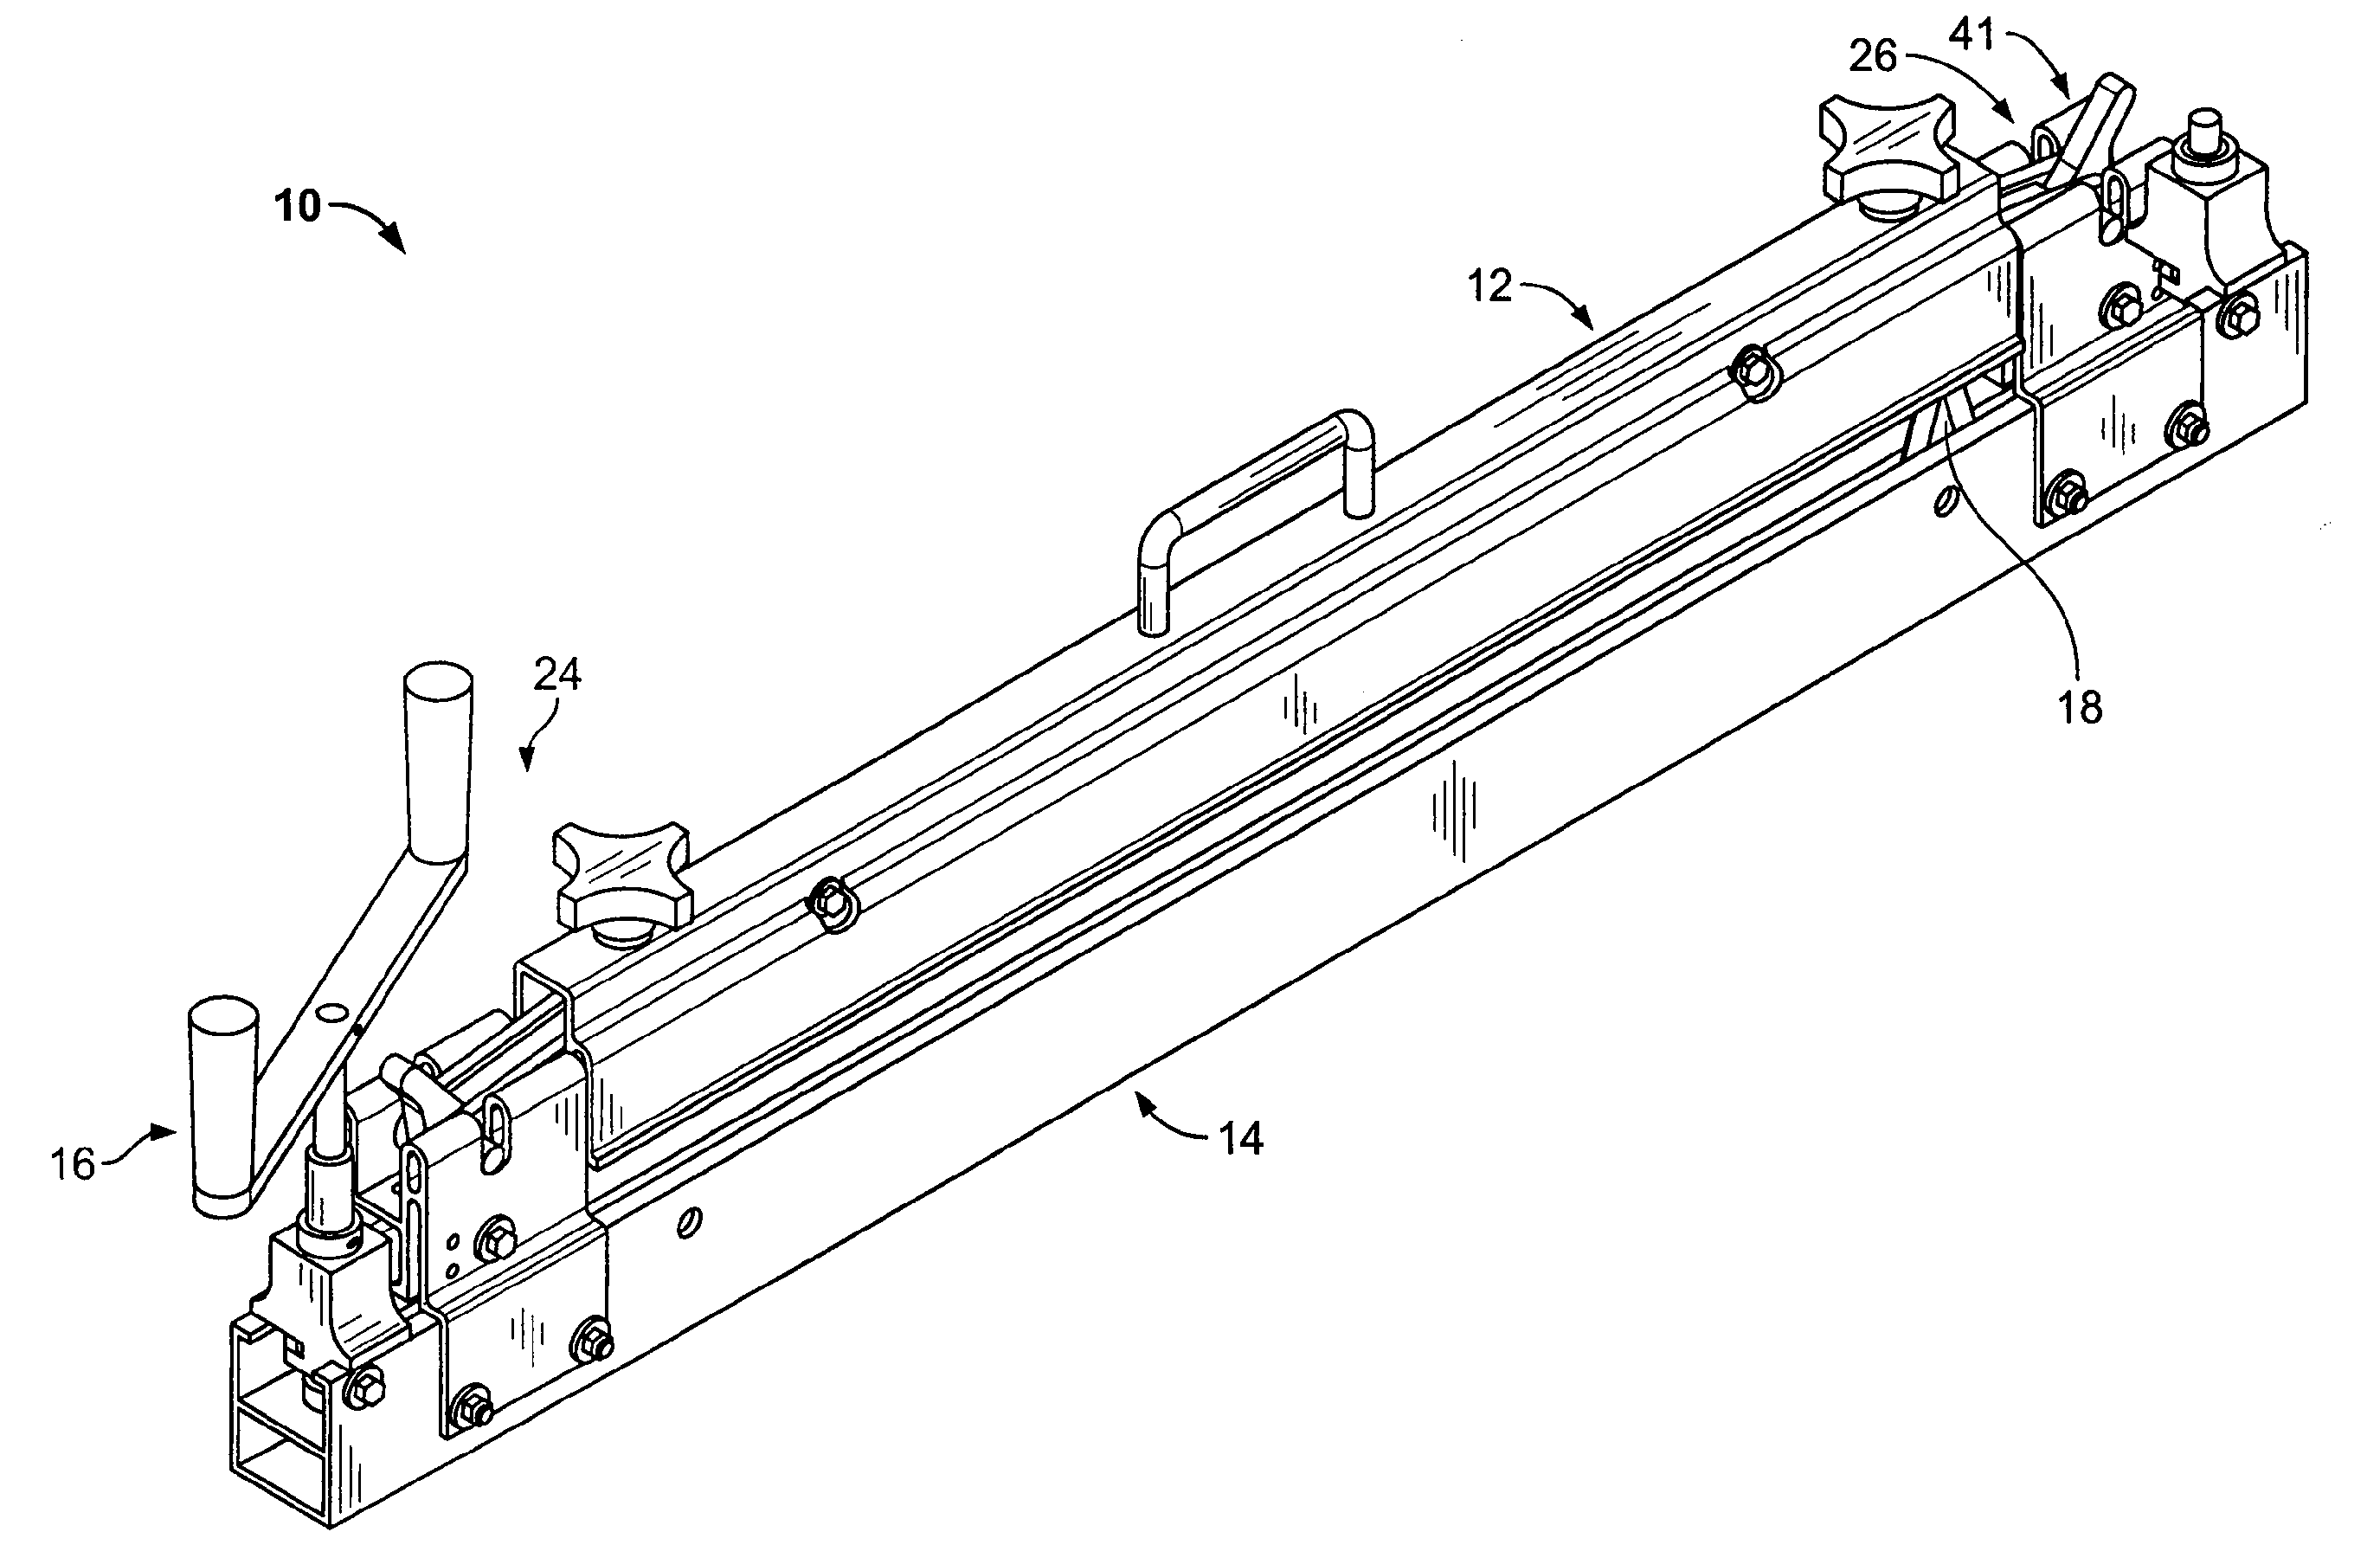 Clamping and Cutting Apparatus for Conveyor Belts